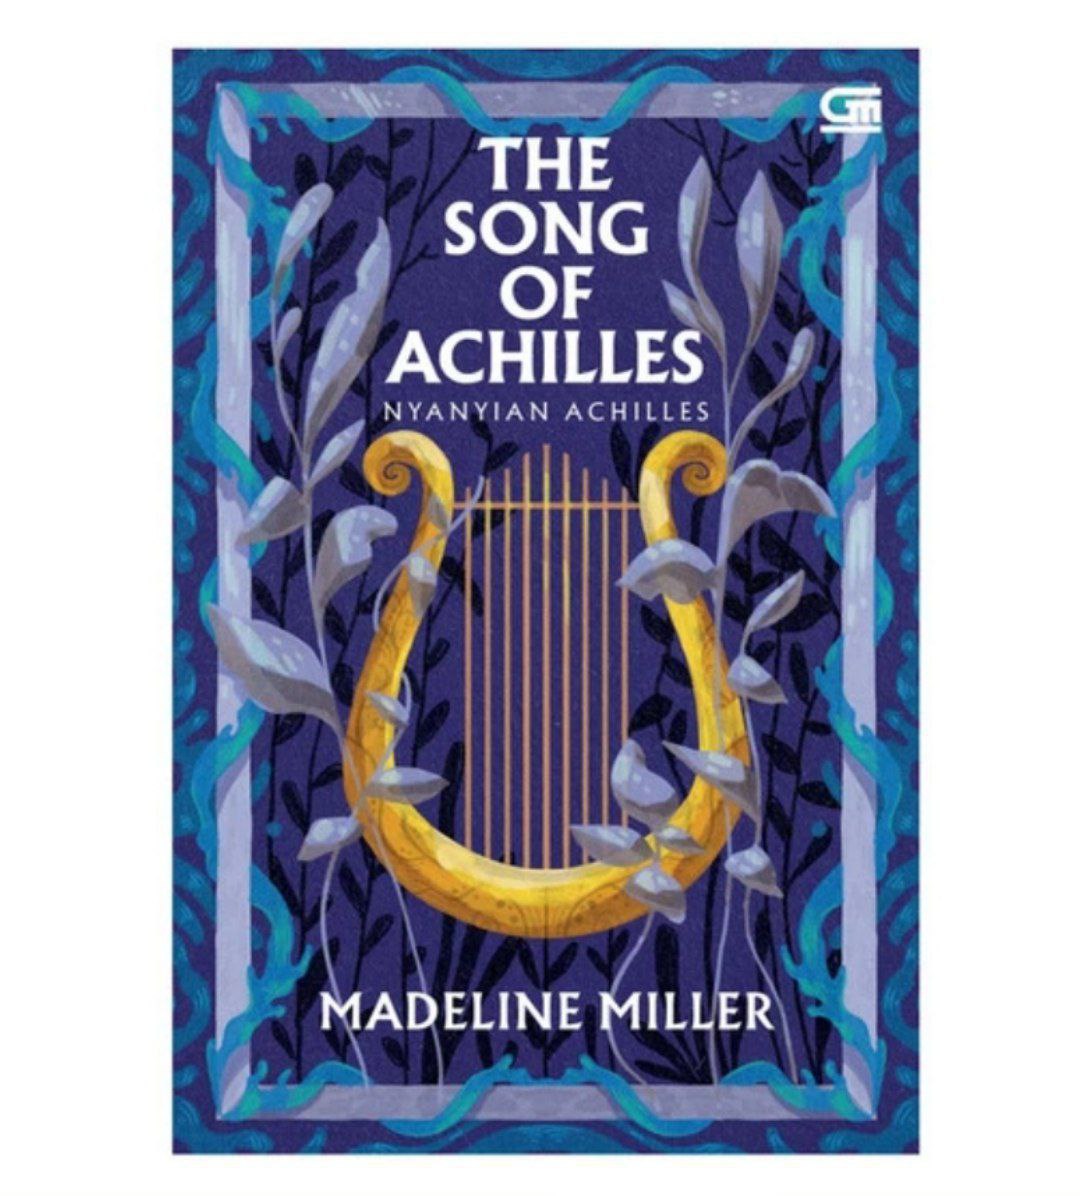 /lt The Song of Achilles new sealed dpt di harga 88k yay/nay ya guys?